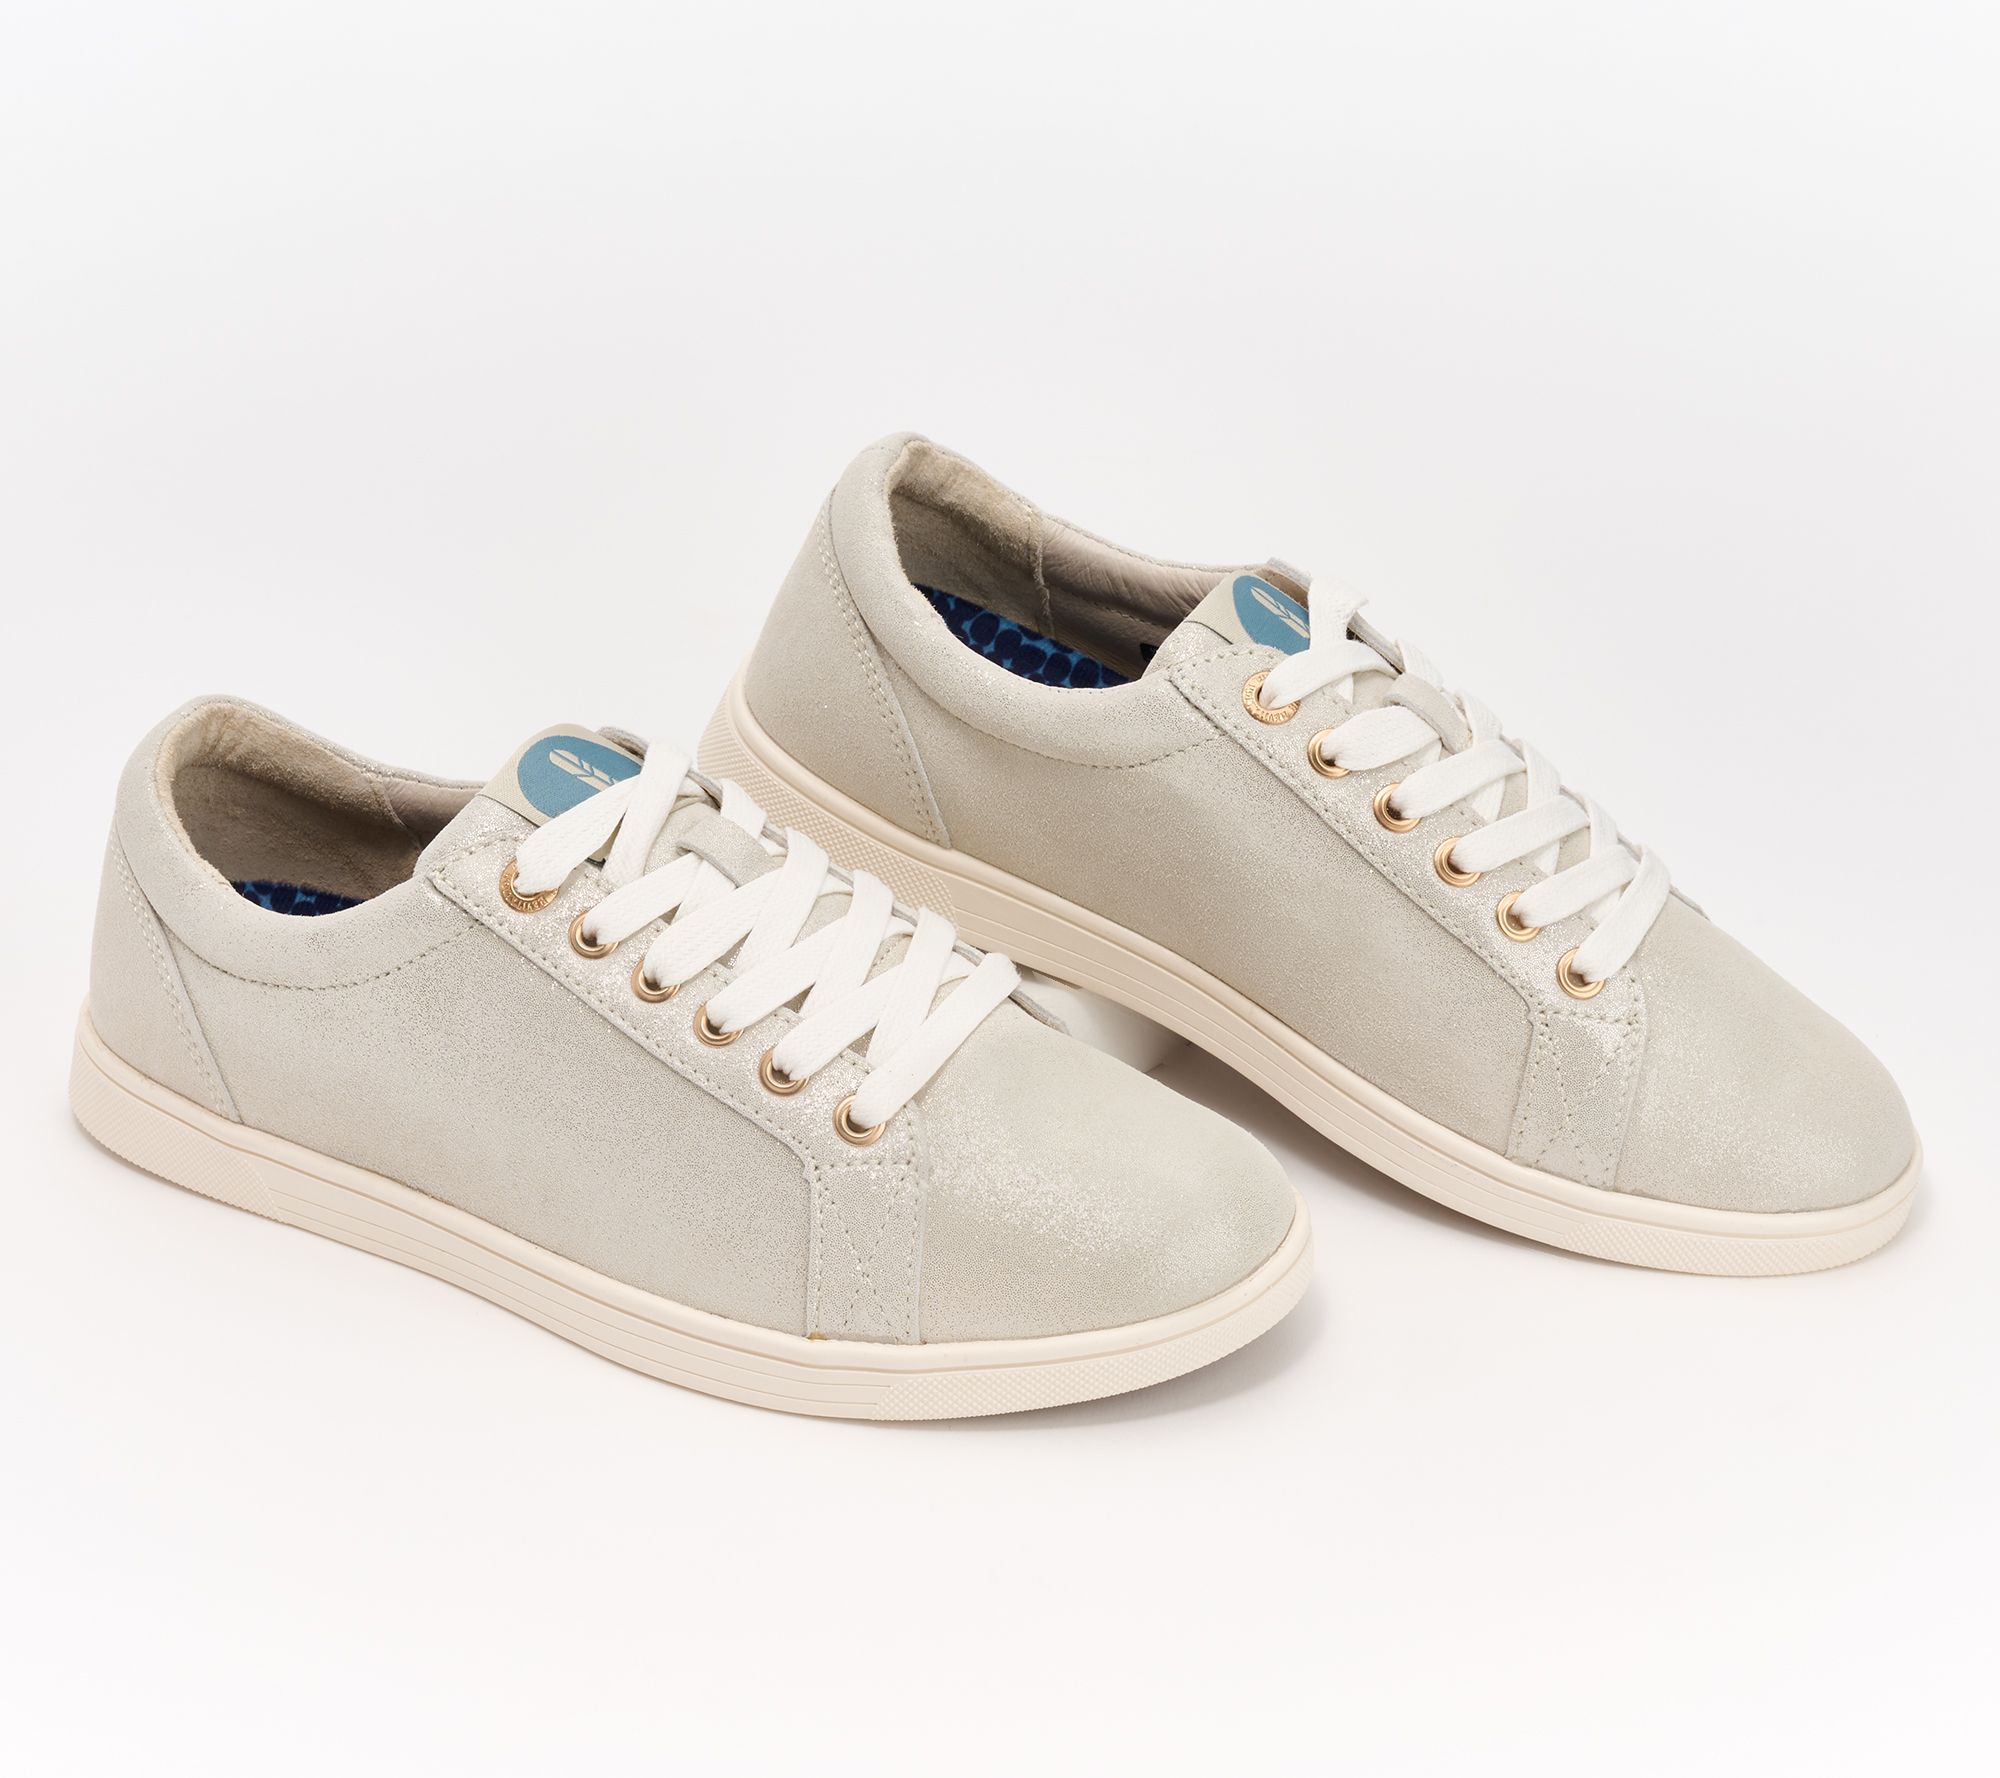 Revitalign Orthotic Casual Leather Sneakers Empire - QVC.com